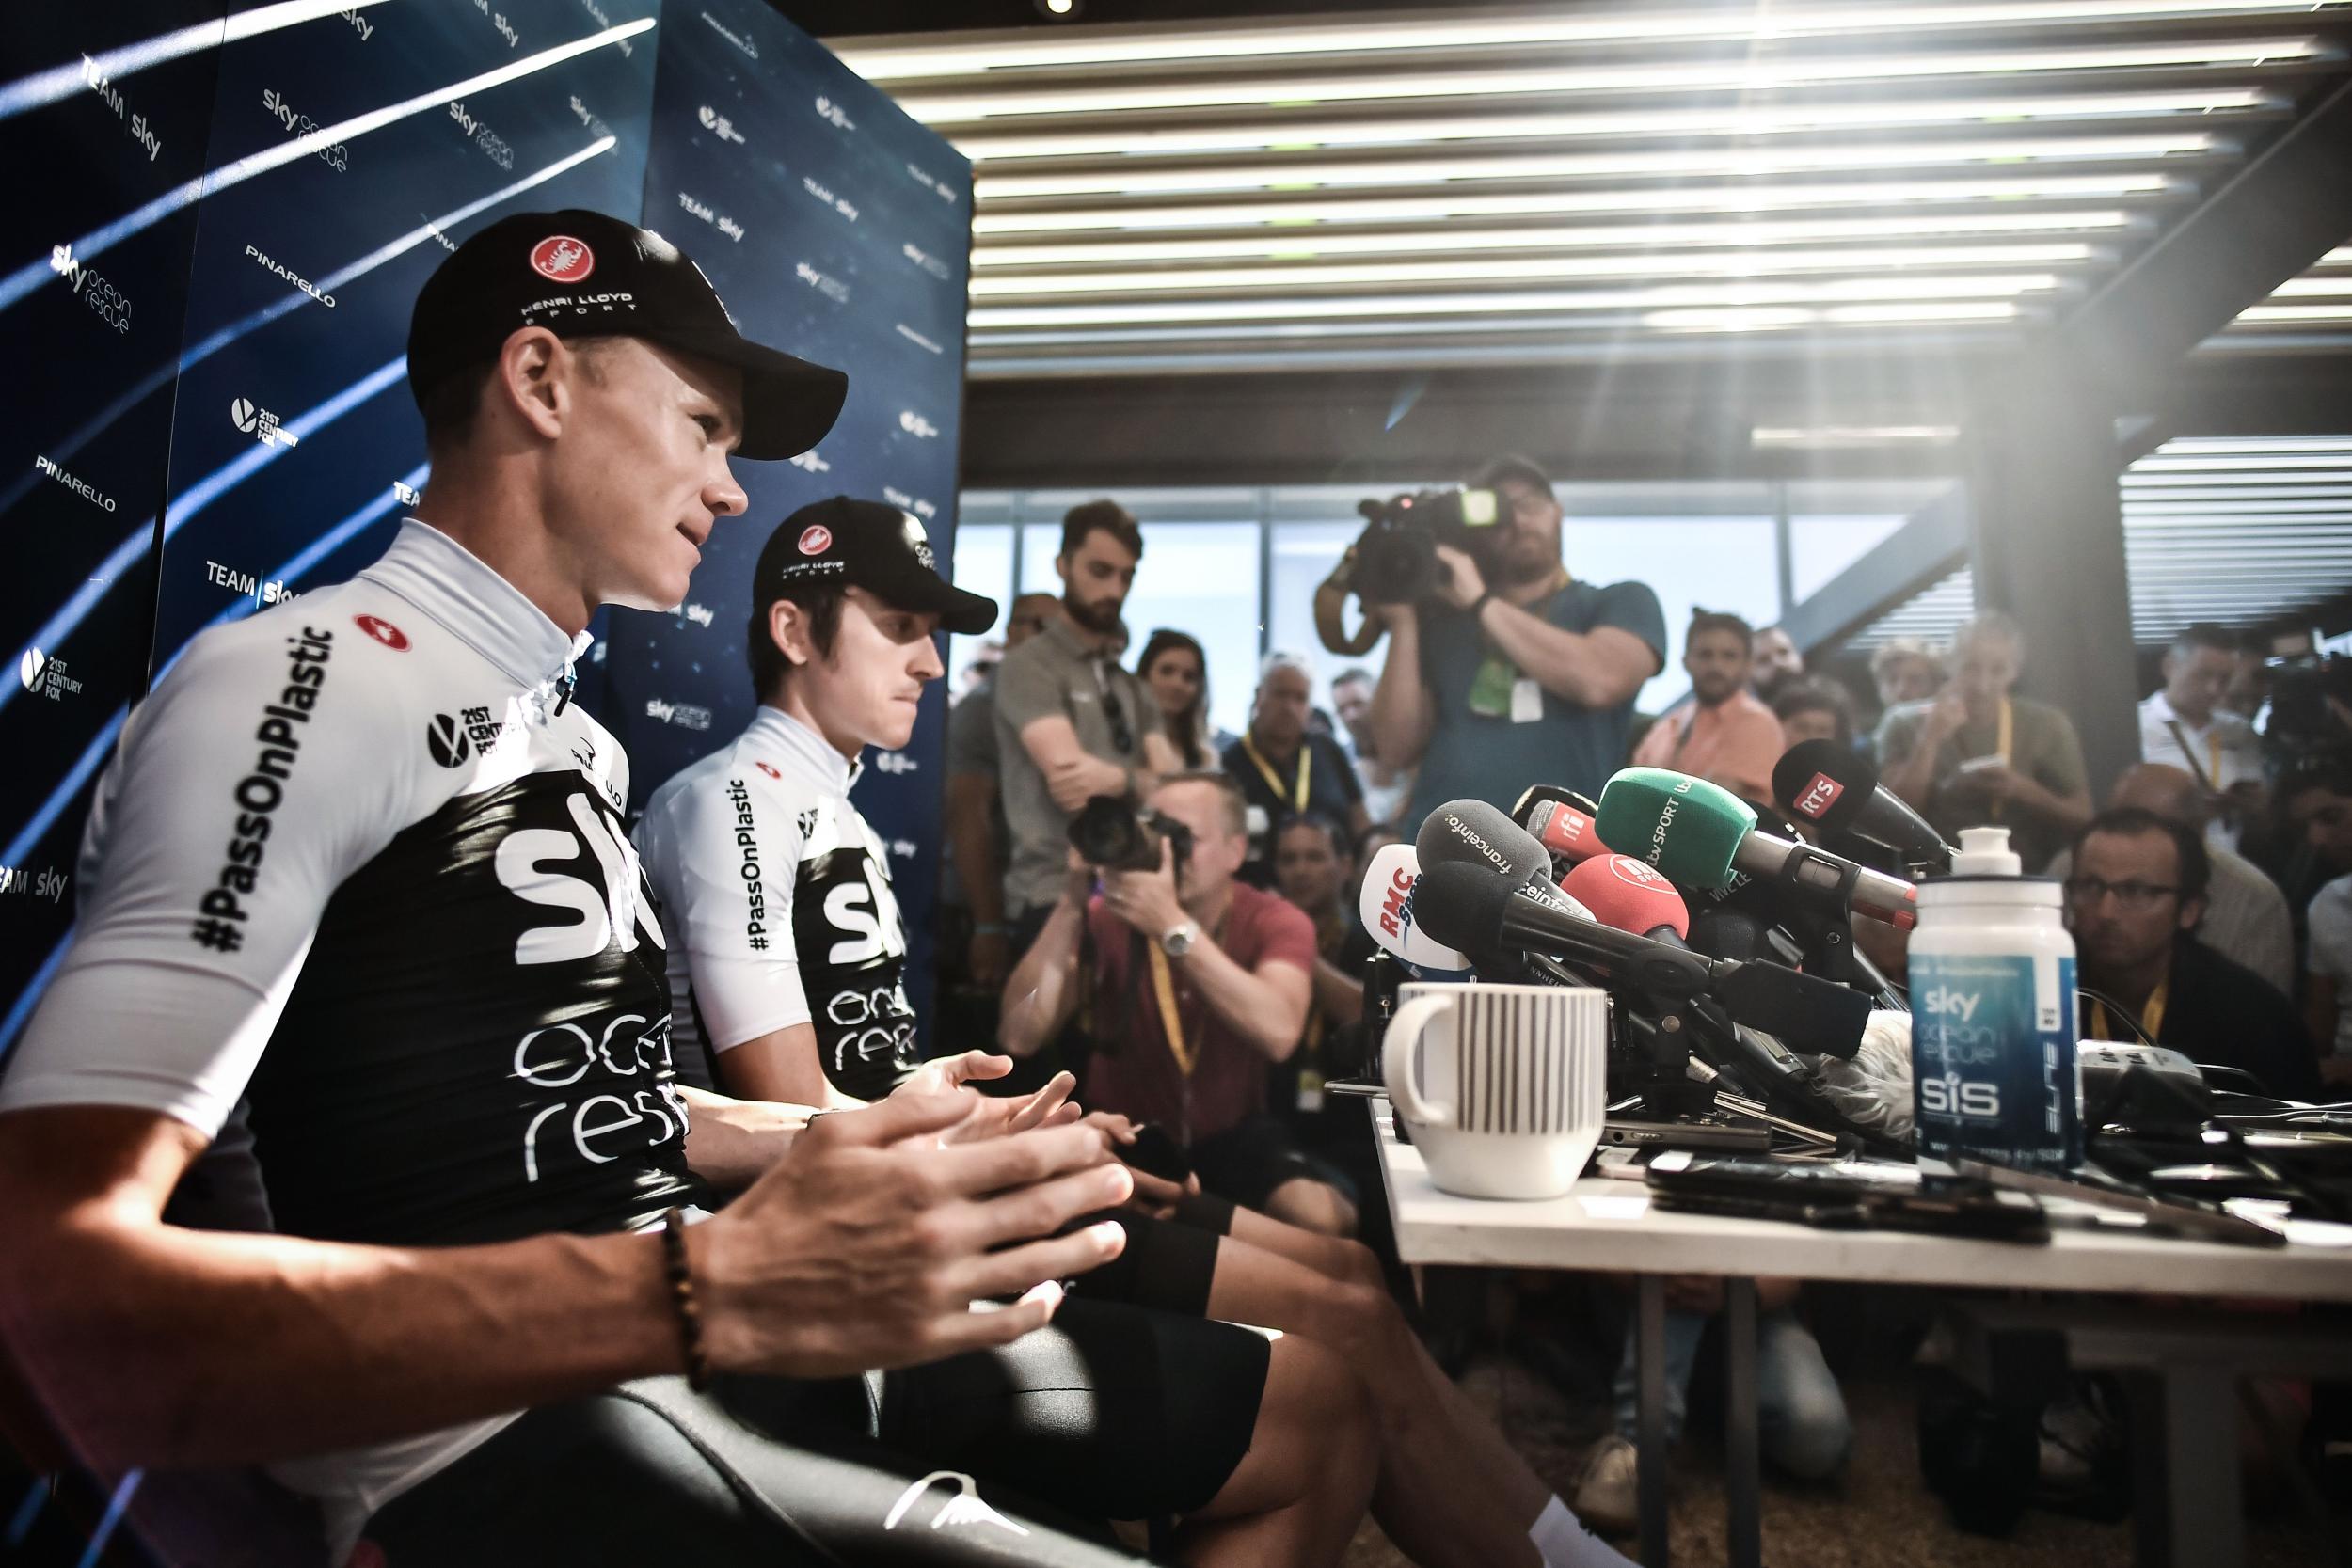 Team Sky have drawn criticism throughout the race